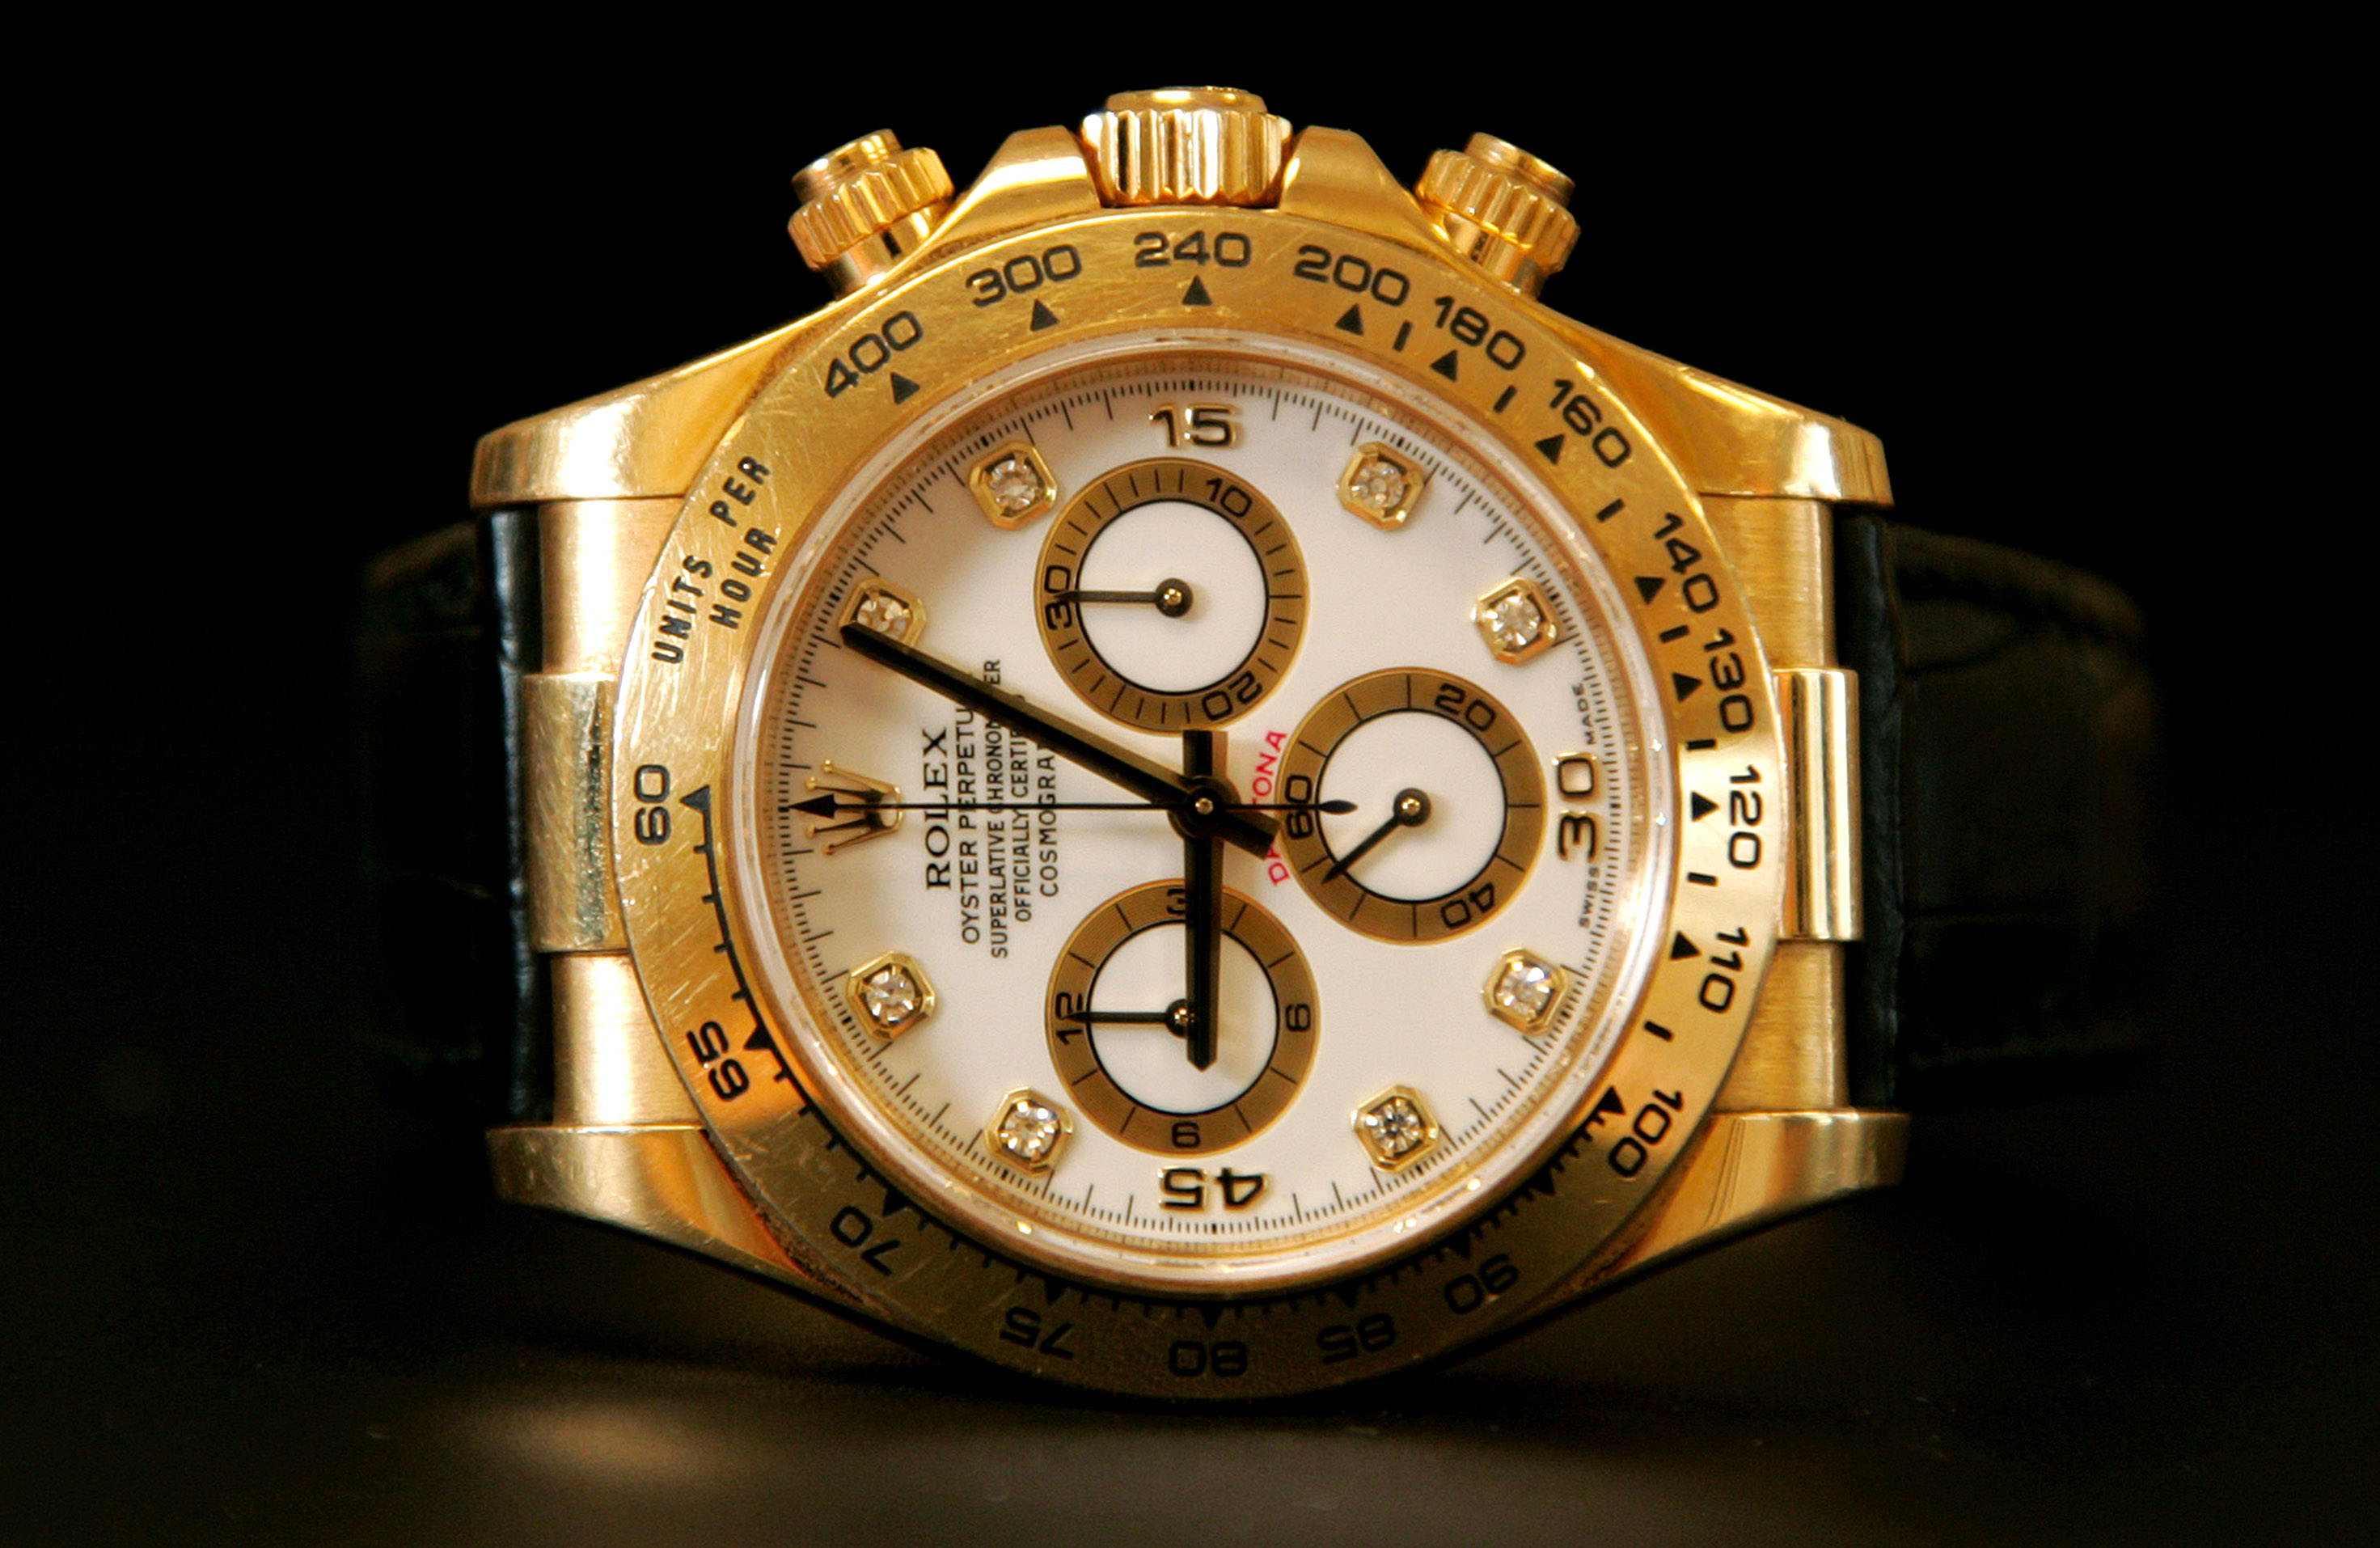 Rolex Hikes Watch Prices by in as Sterling - Bloomberg